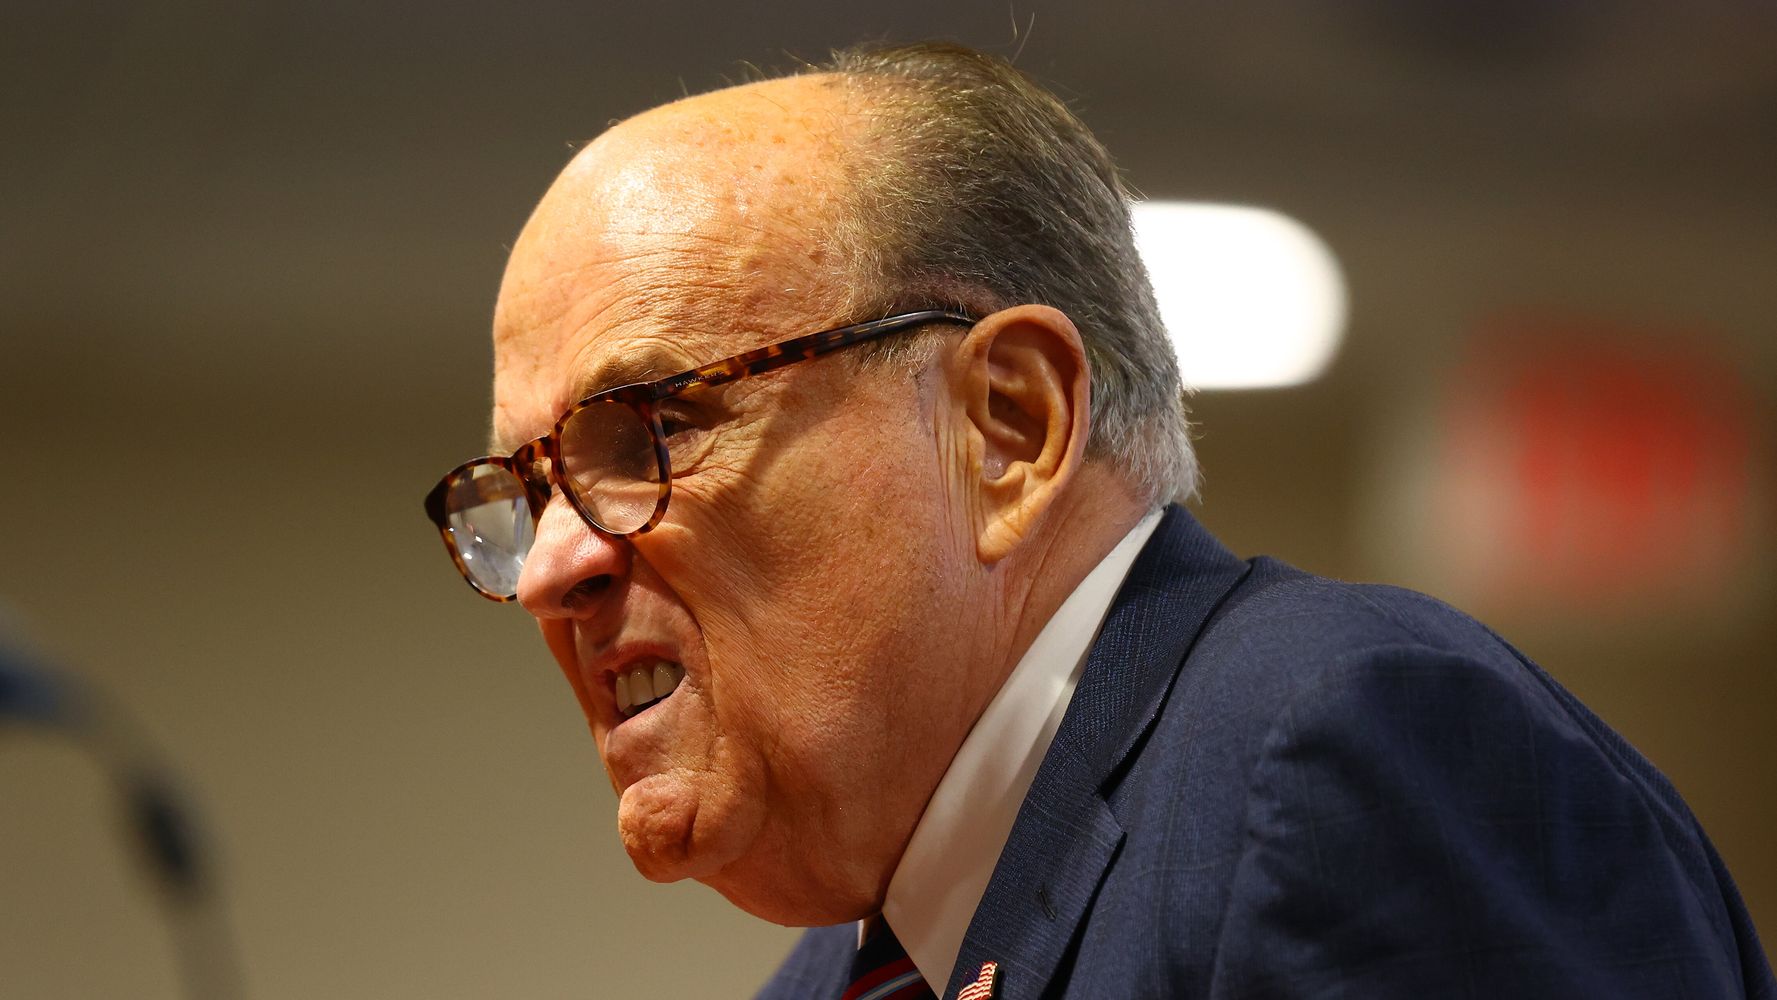 Feds Probing If Ukrainian Officials Used Giuliani To Spread Disinformation: Report